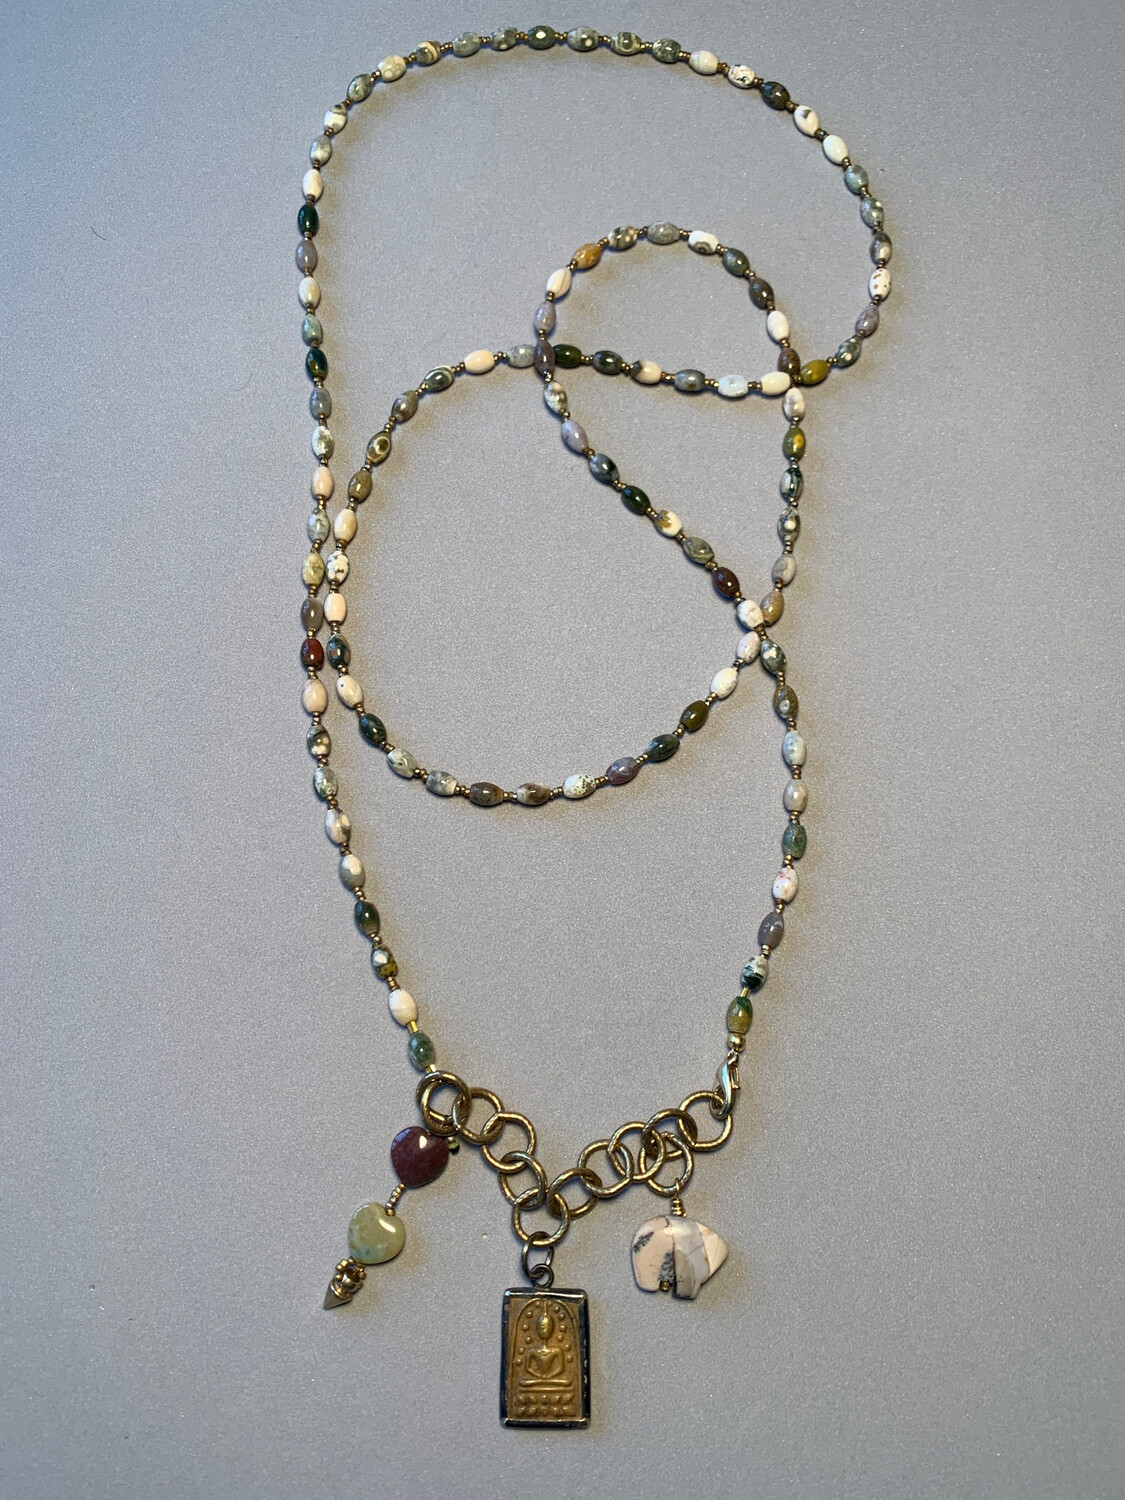 Agates and Buddha Necklace